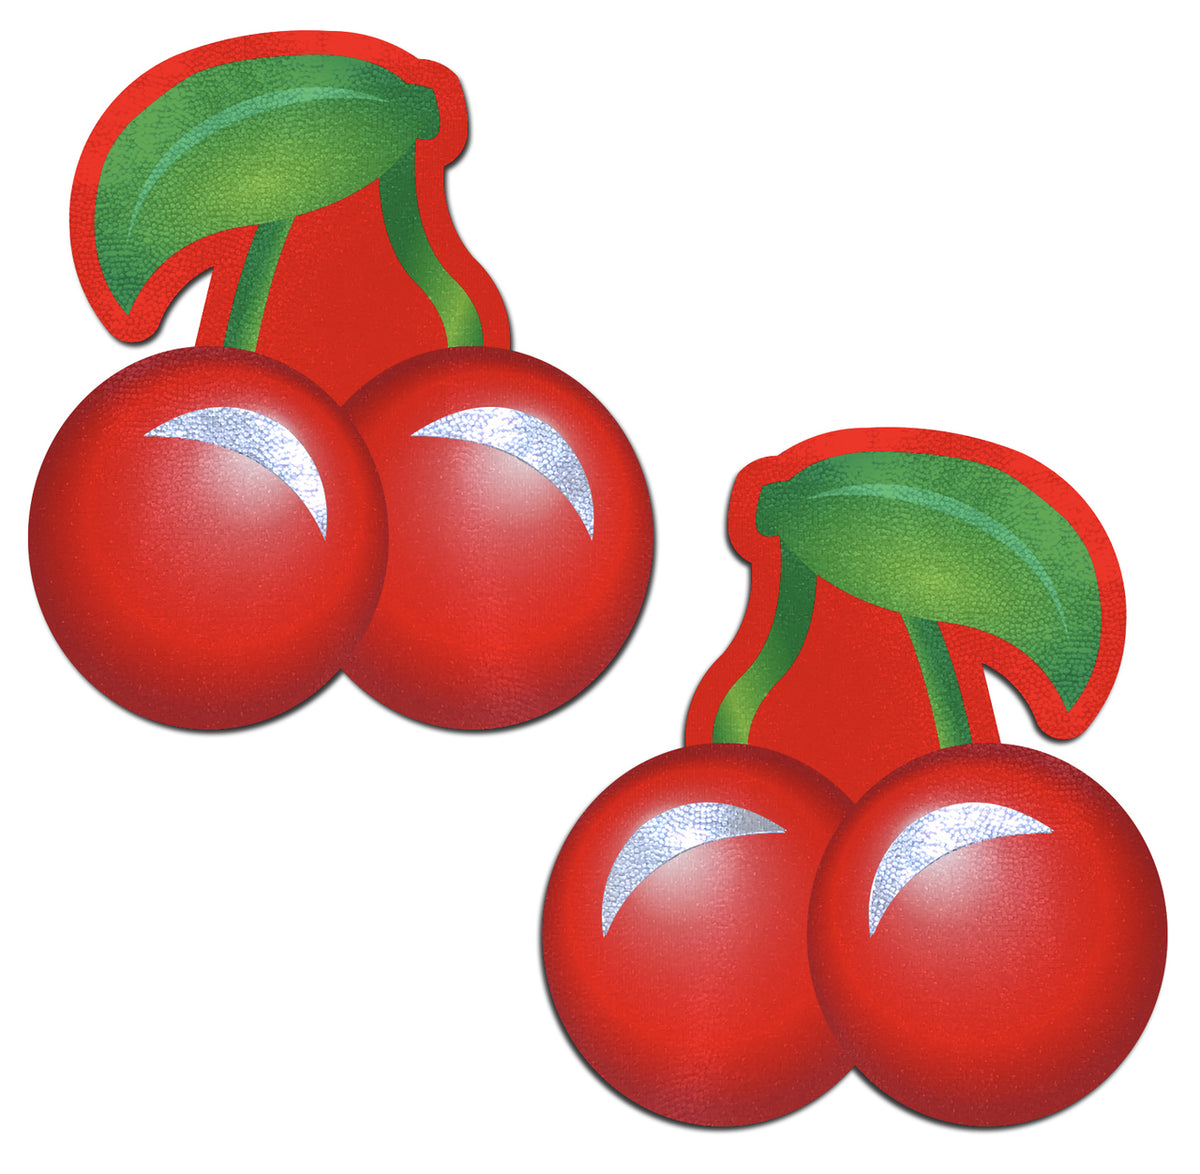 Cherry: Bright Red Cherries with Green Leaf & Stem Nipple Pasties